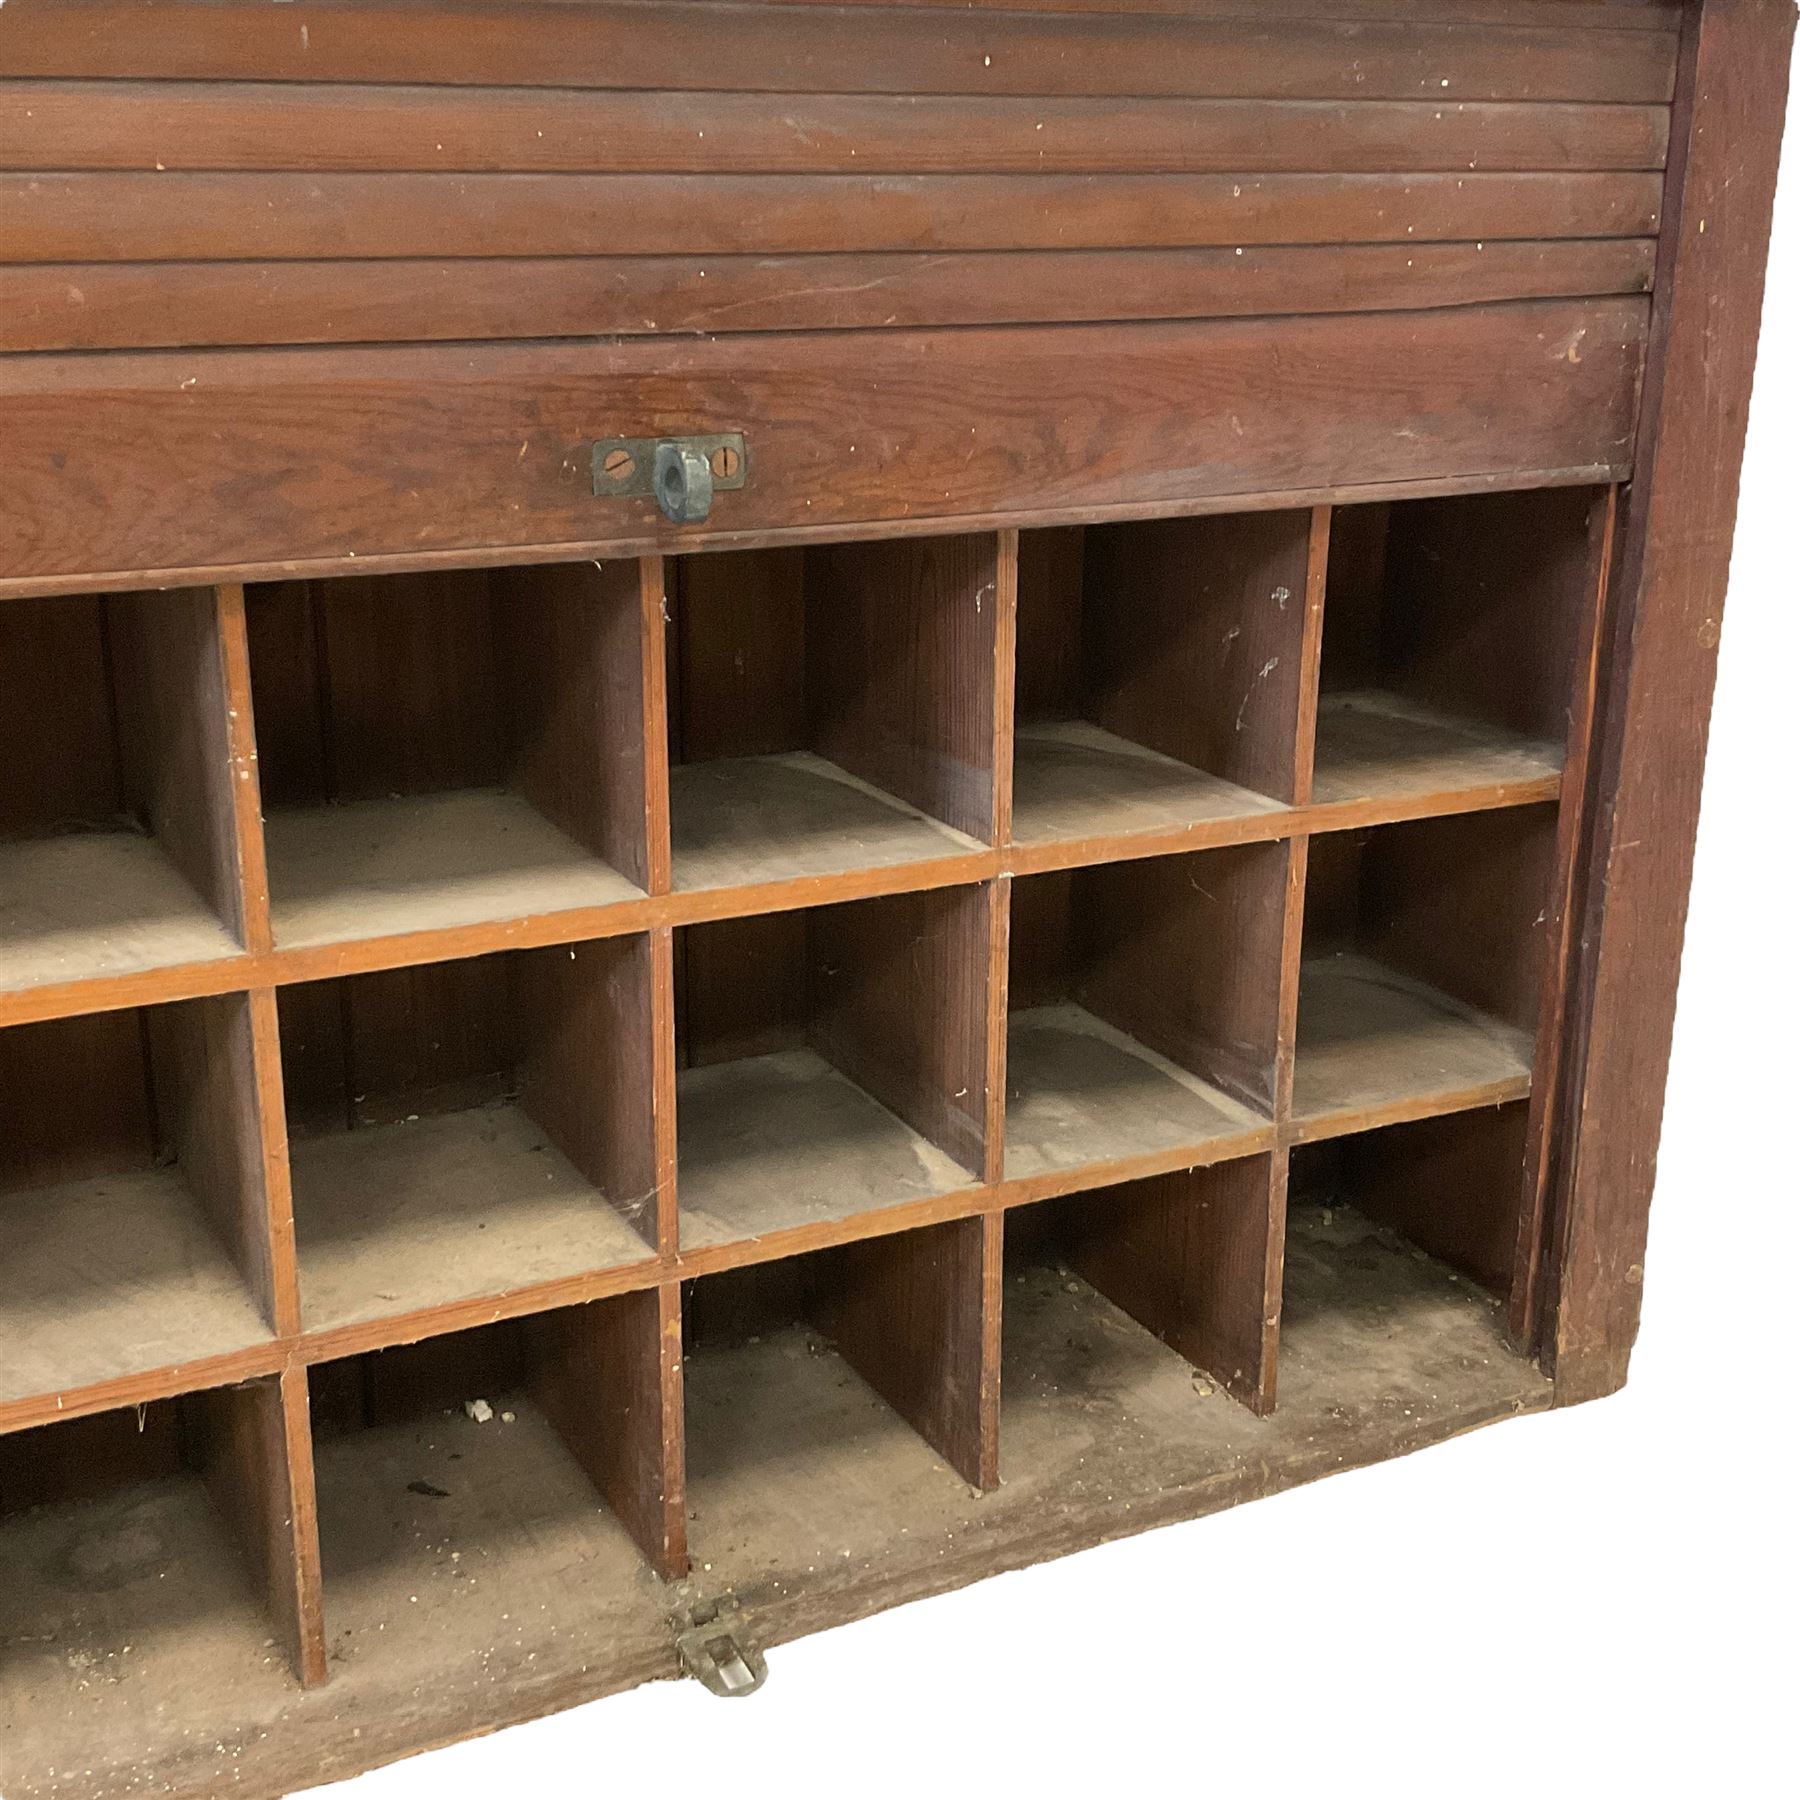 19th century oak hotel or post office pigeonhole cabinet - Image 2 of 6